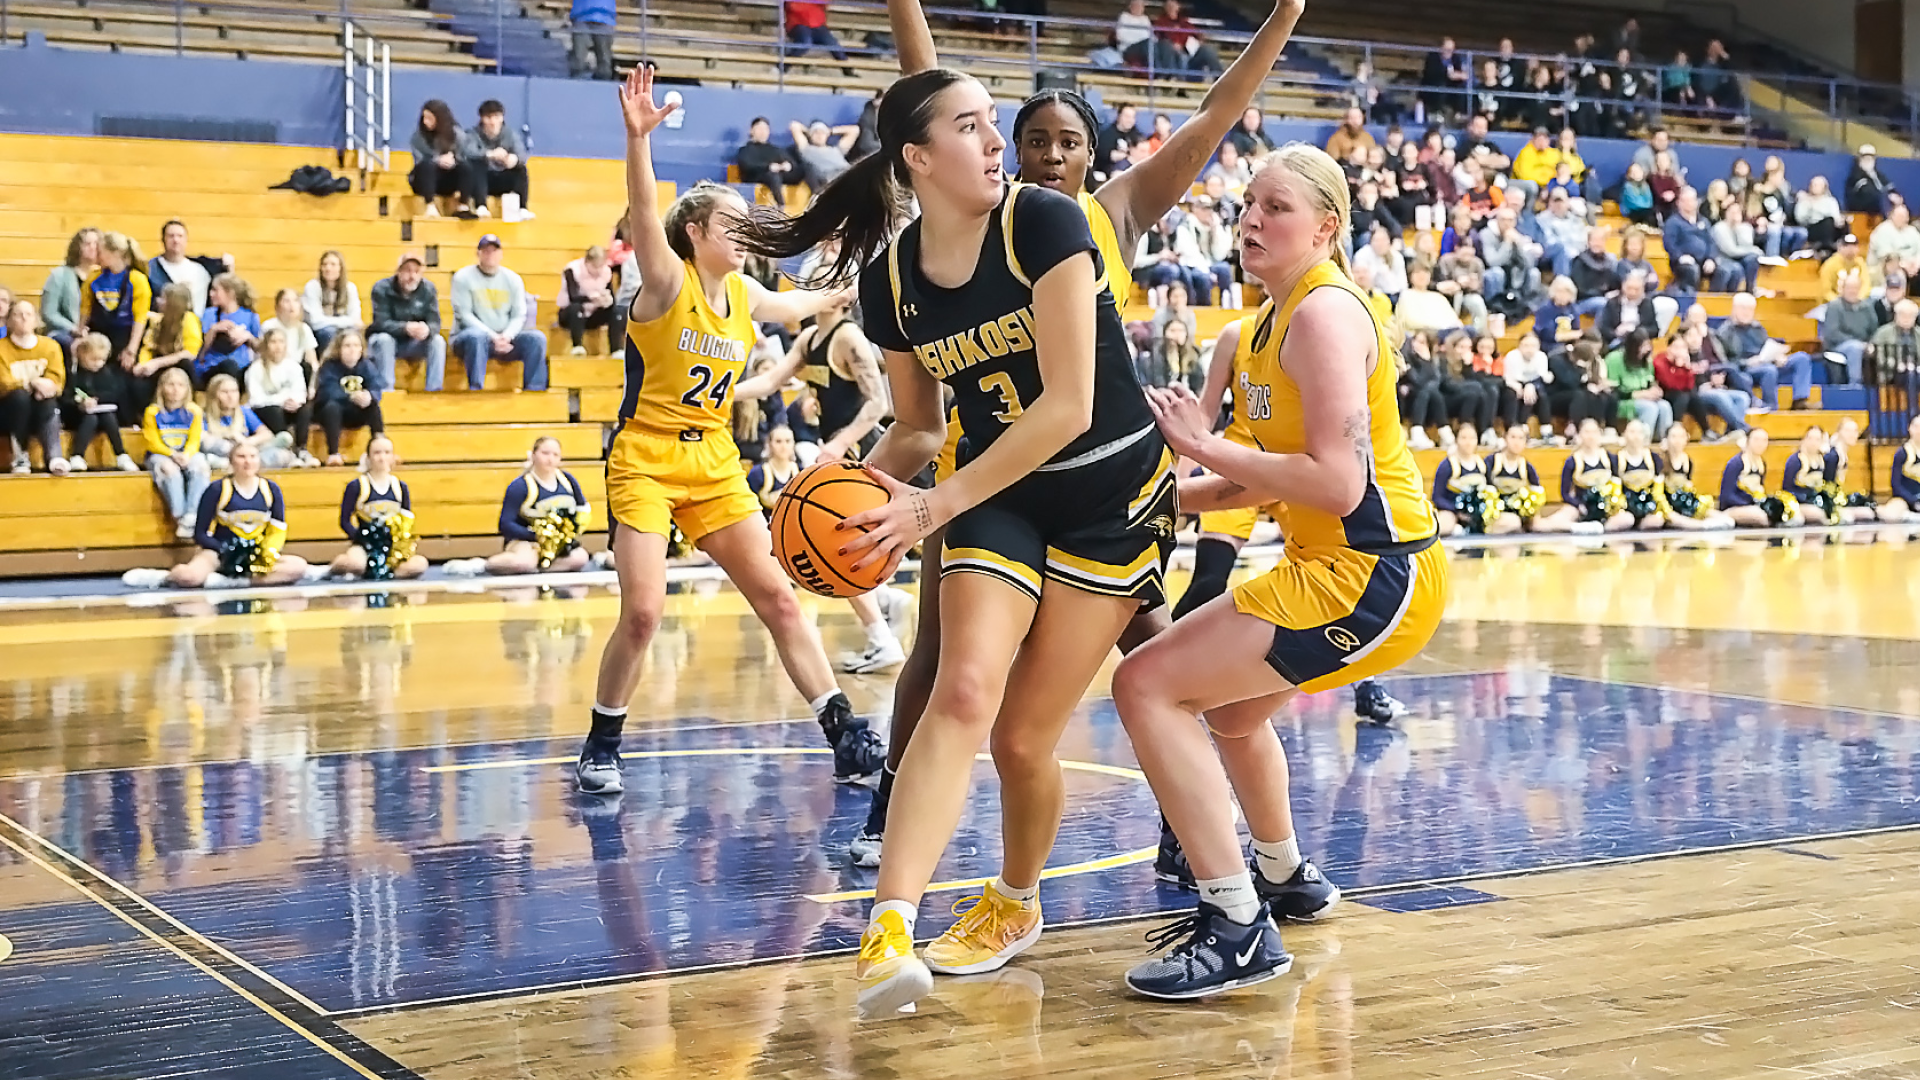 Sarah Hardwick pulled down a game-leading seven rebounds at Zorn Arena on Wednesday night. Photo Credit: Chico La Barbera, UW-Eau Claire Sports Information